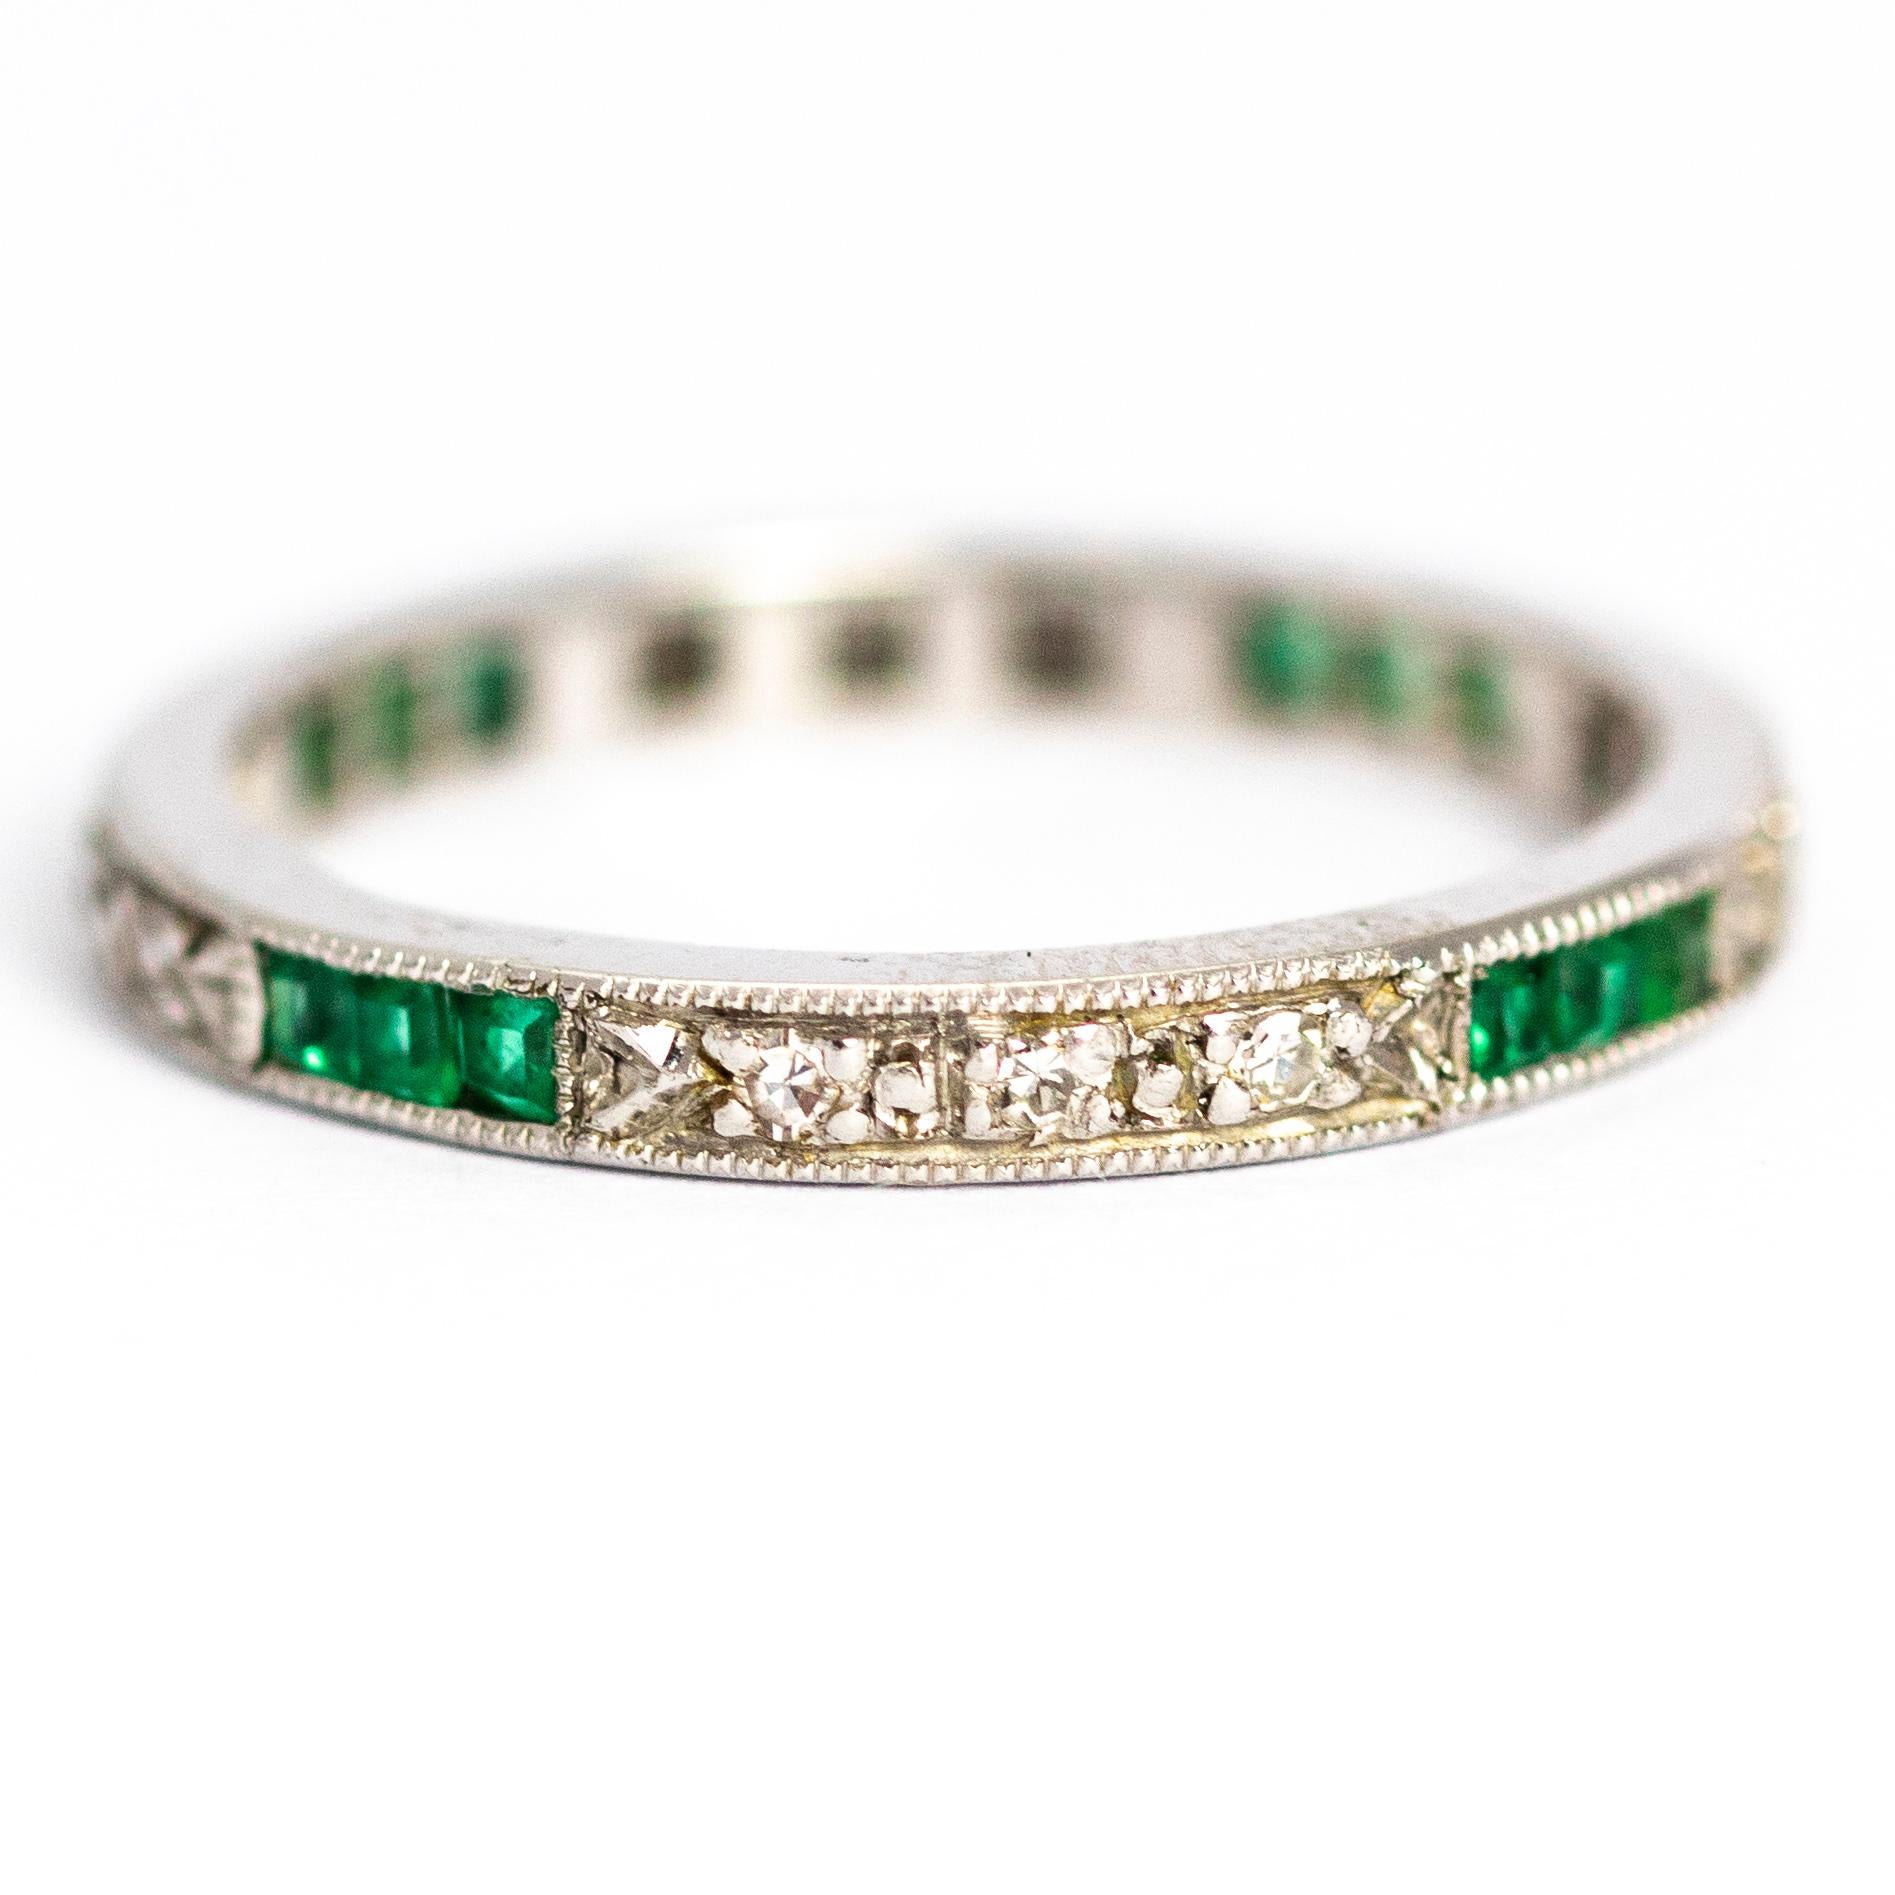 A stunning vintage eternity band ring fully set with emeralds and diamonds. Alternating trios of princess-cut green emeralds are set between trios of round-cut white diamonds all around this wonderful ring. Modelled in 18 carat white gold.

Ring